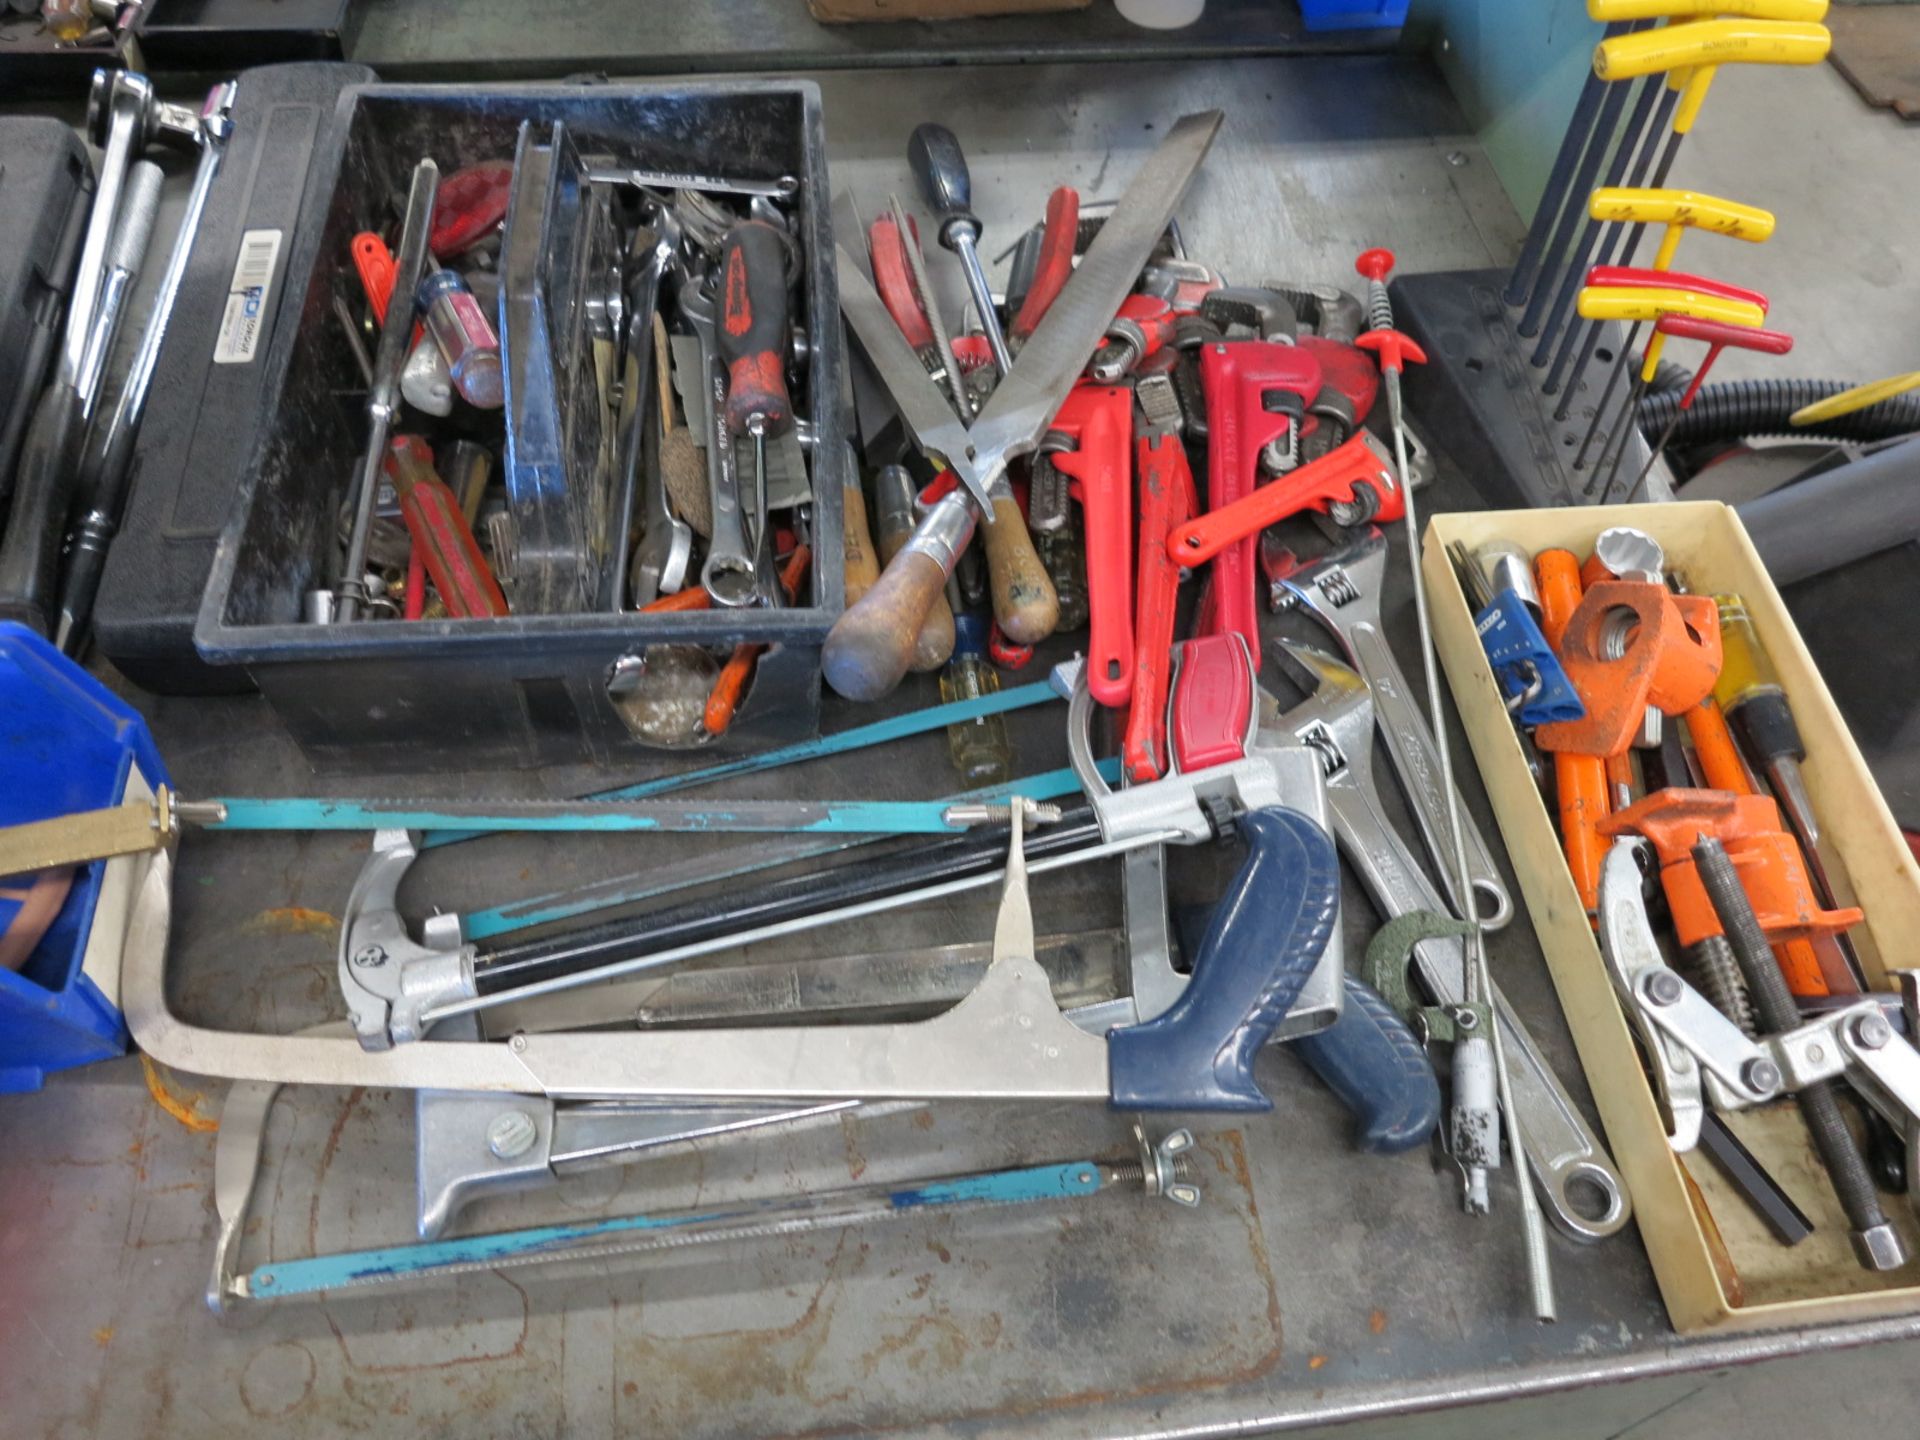 5' STEEL WORKBENCH WITH LARGE ASSORTMENT OF HAND TOOLS INCLUDING APPROX 5 TORQUE WRENCHES, ETC. - Image 4 of 5